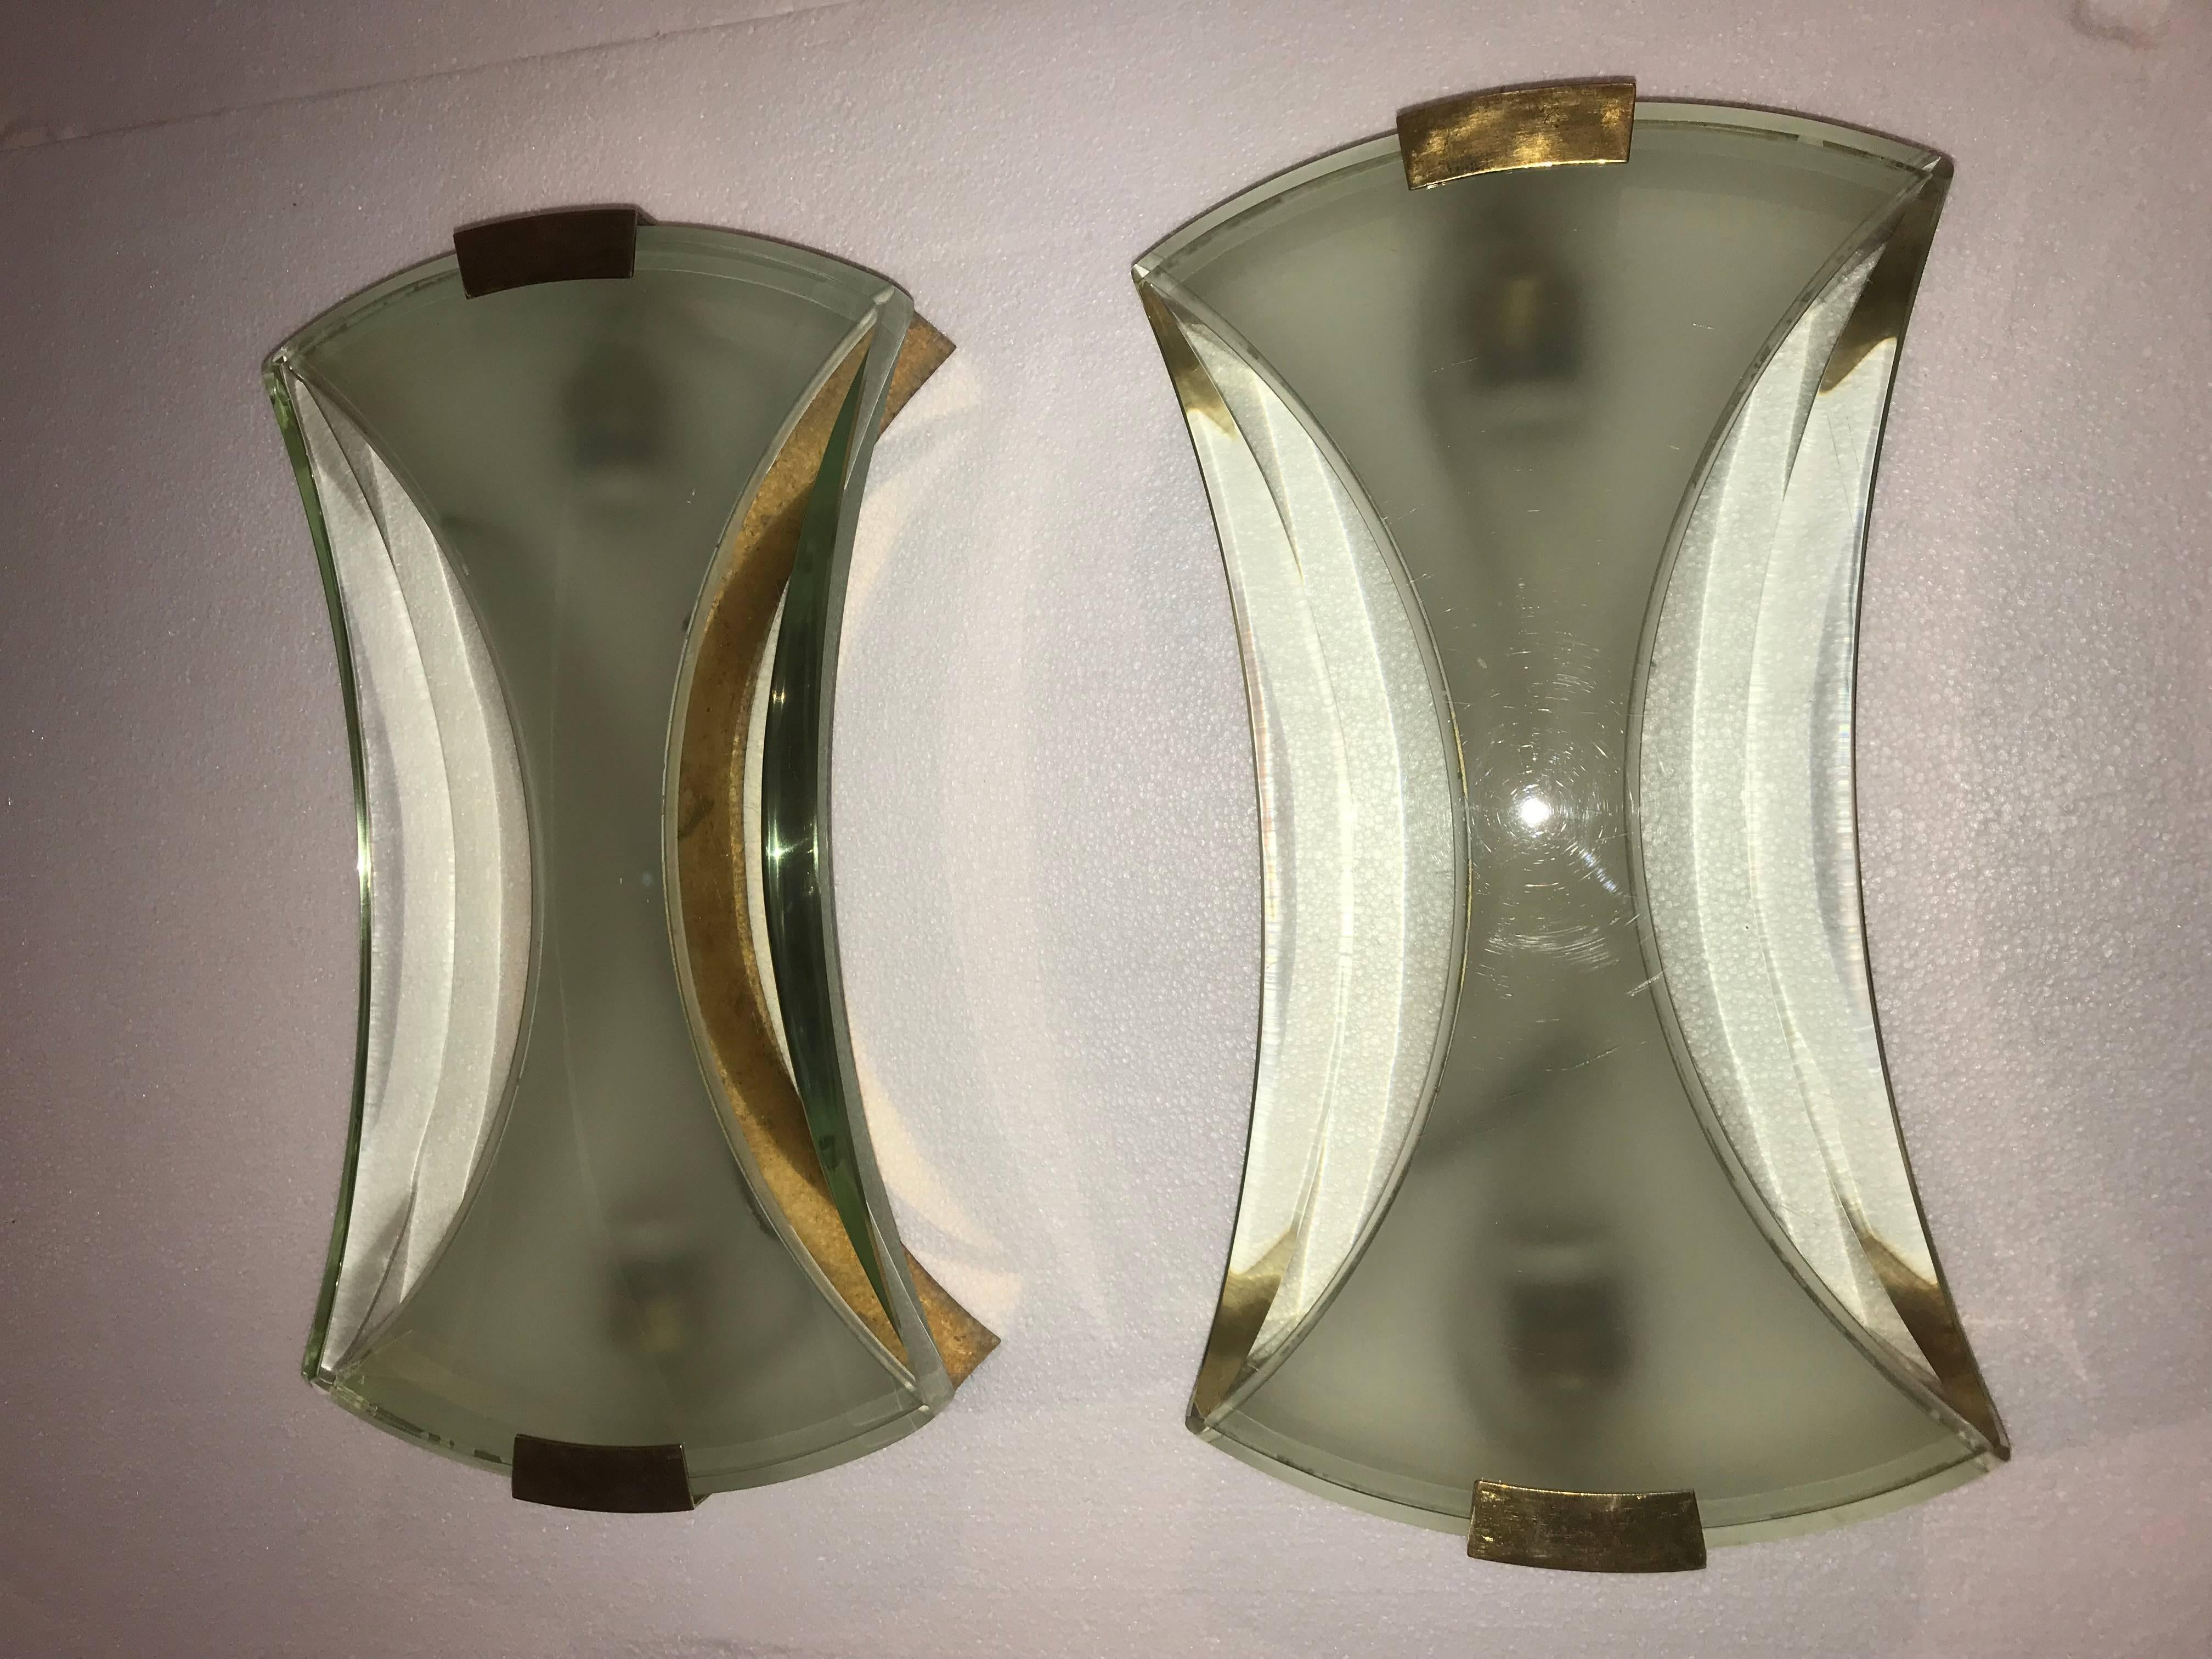 Mid-Century Modern sconces by Max Ingrand for Fontana Arte, in brass and glass.
They are in original vintage condition.